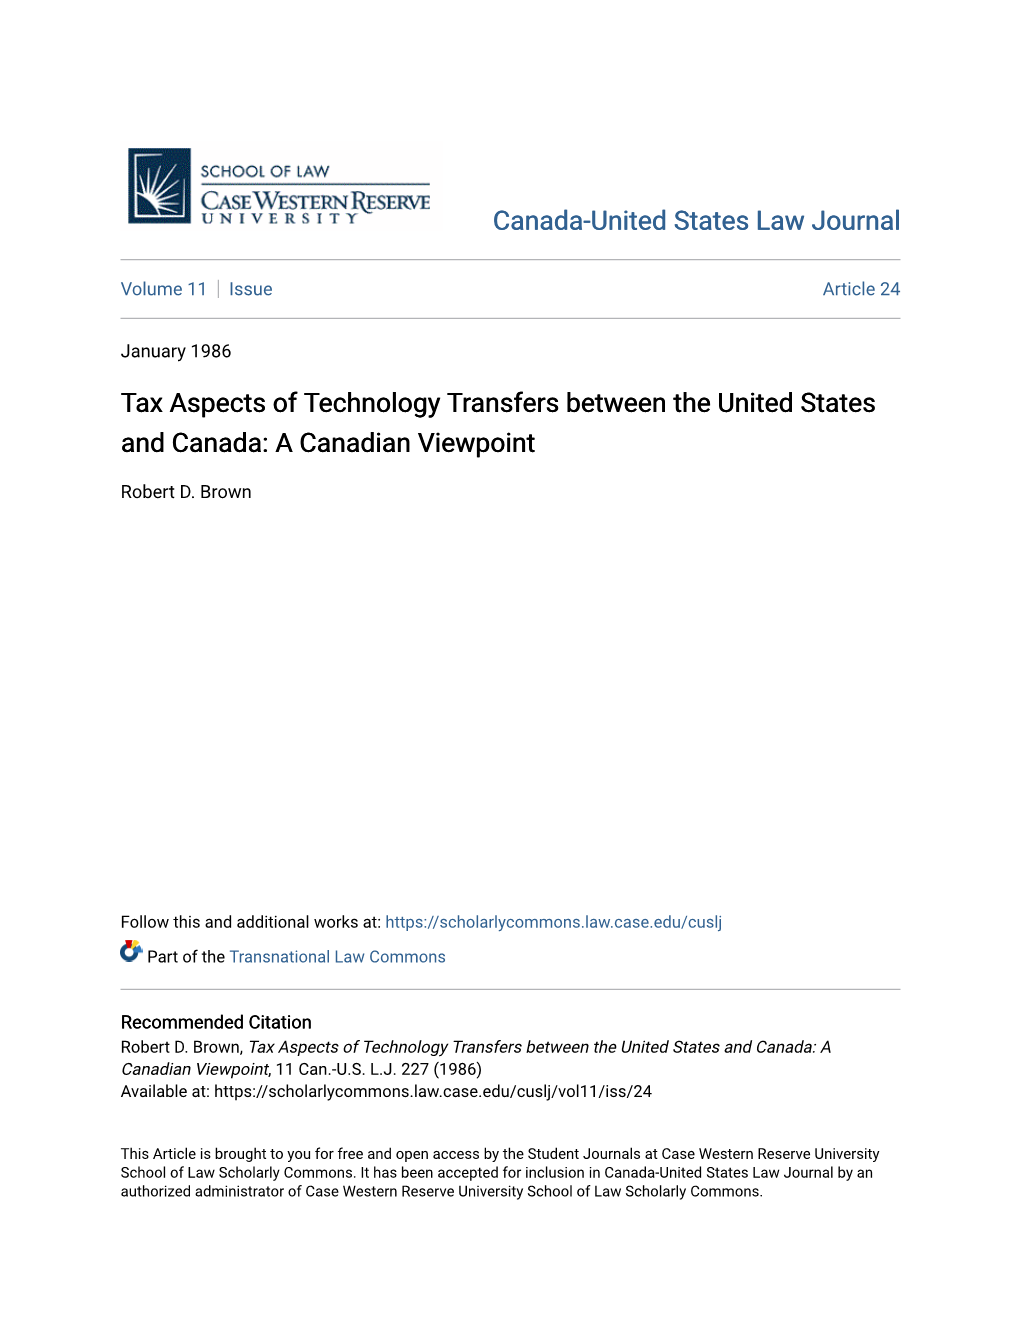 Tax Aspects of Technology Transfers Between the United States and Canada: a Canadian Viewpoint